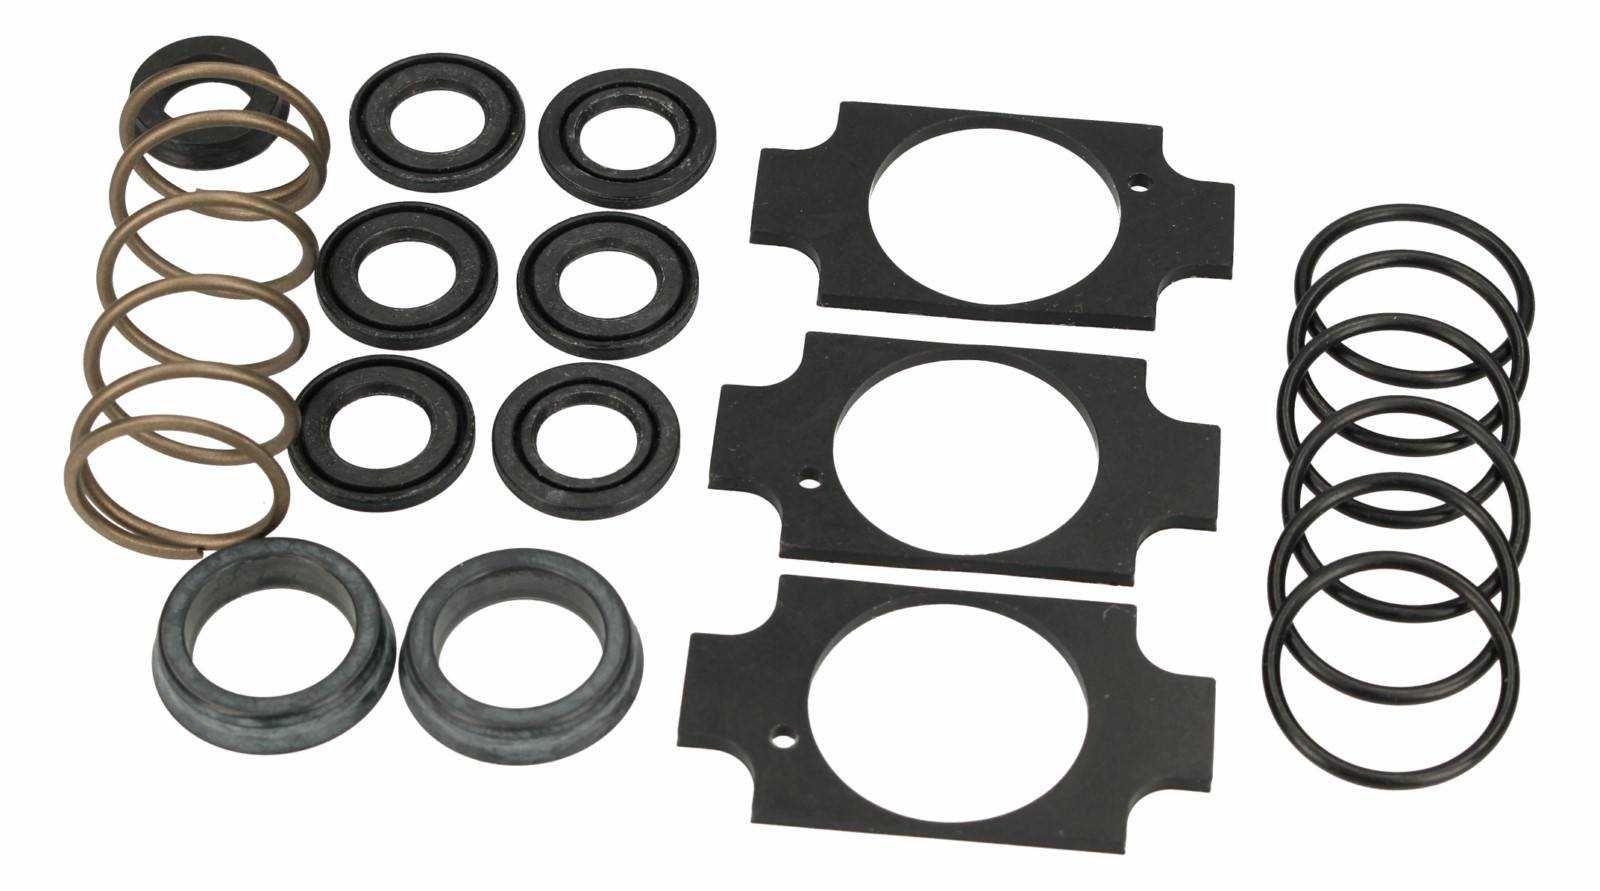 SPARE SET 1 827 009 389 FOR PISTONS REXROTH - Image 1